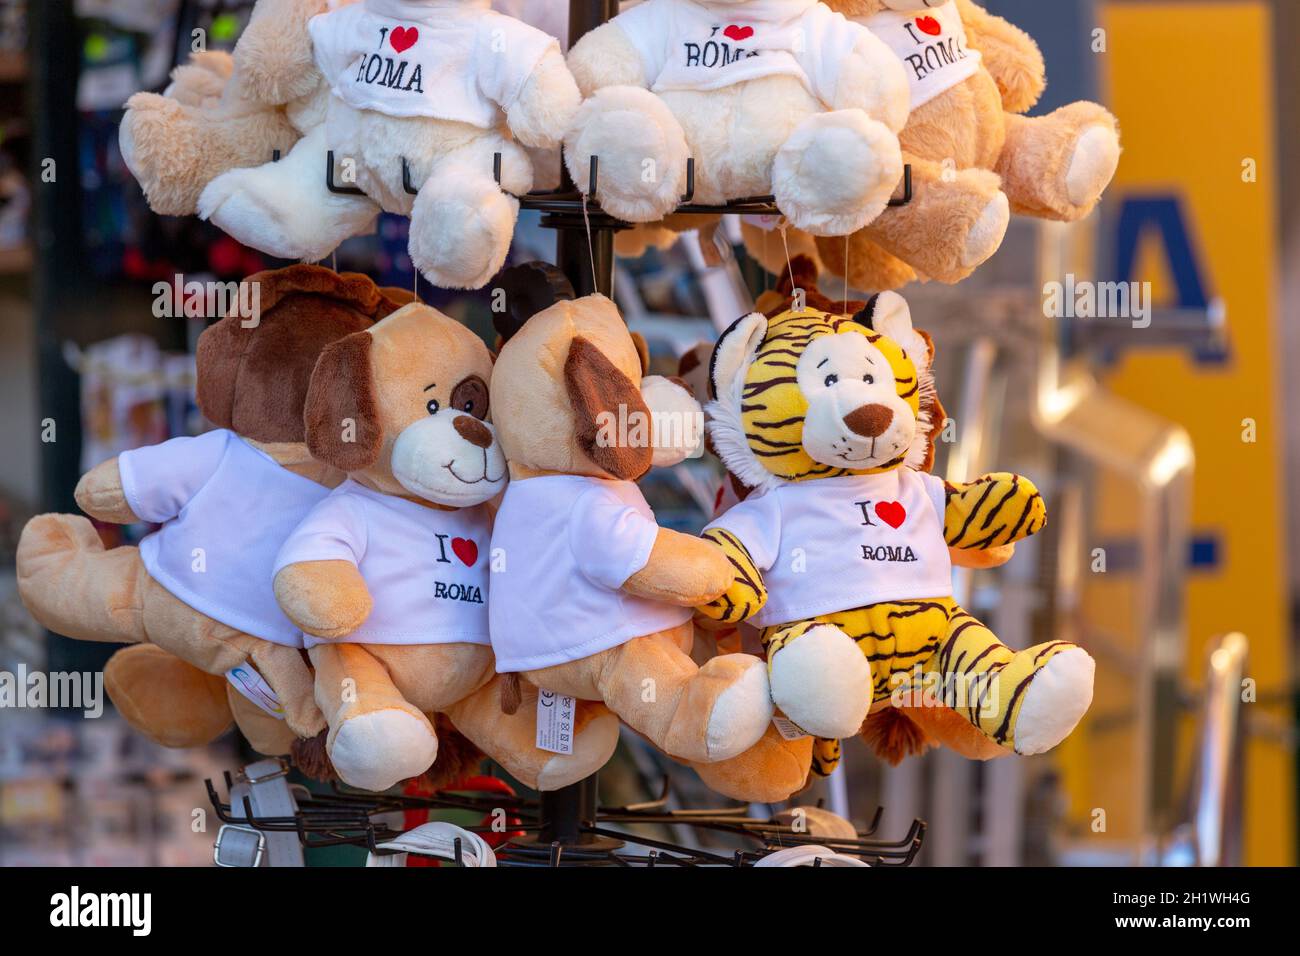 Rome, Italy - October 9, 2020: Plush toys with the inscription 'I love Roma', a souvenir shop on the street in the city Stock Photo